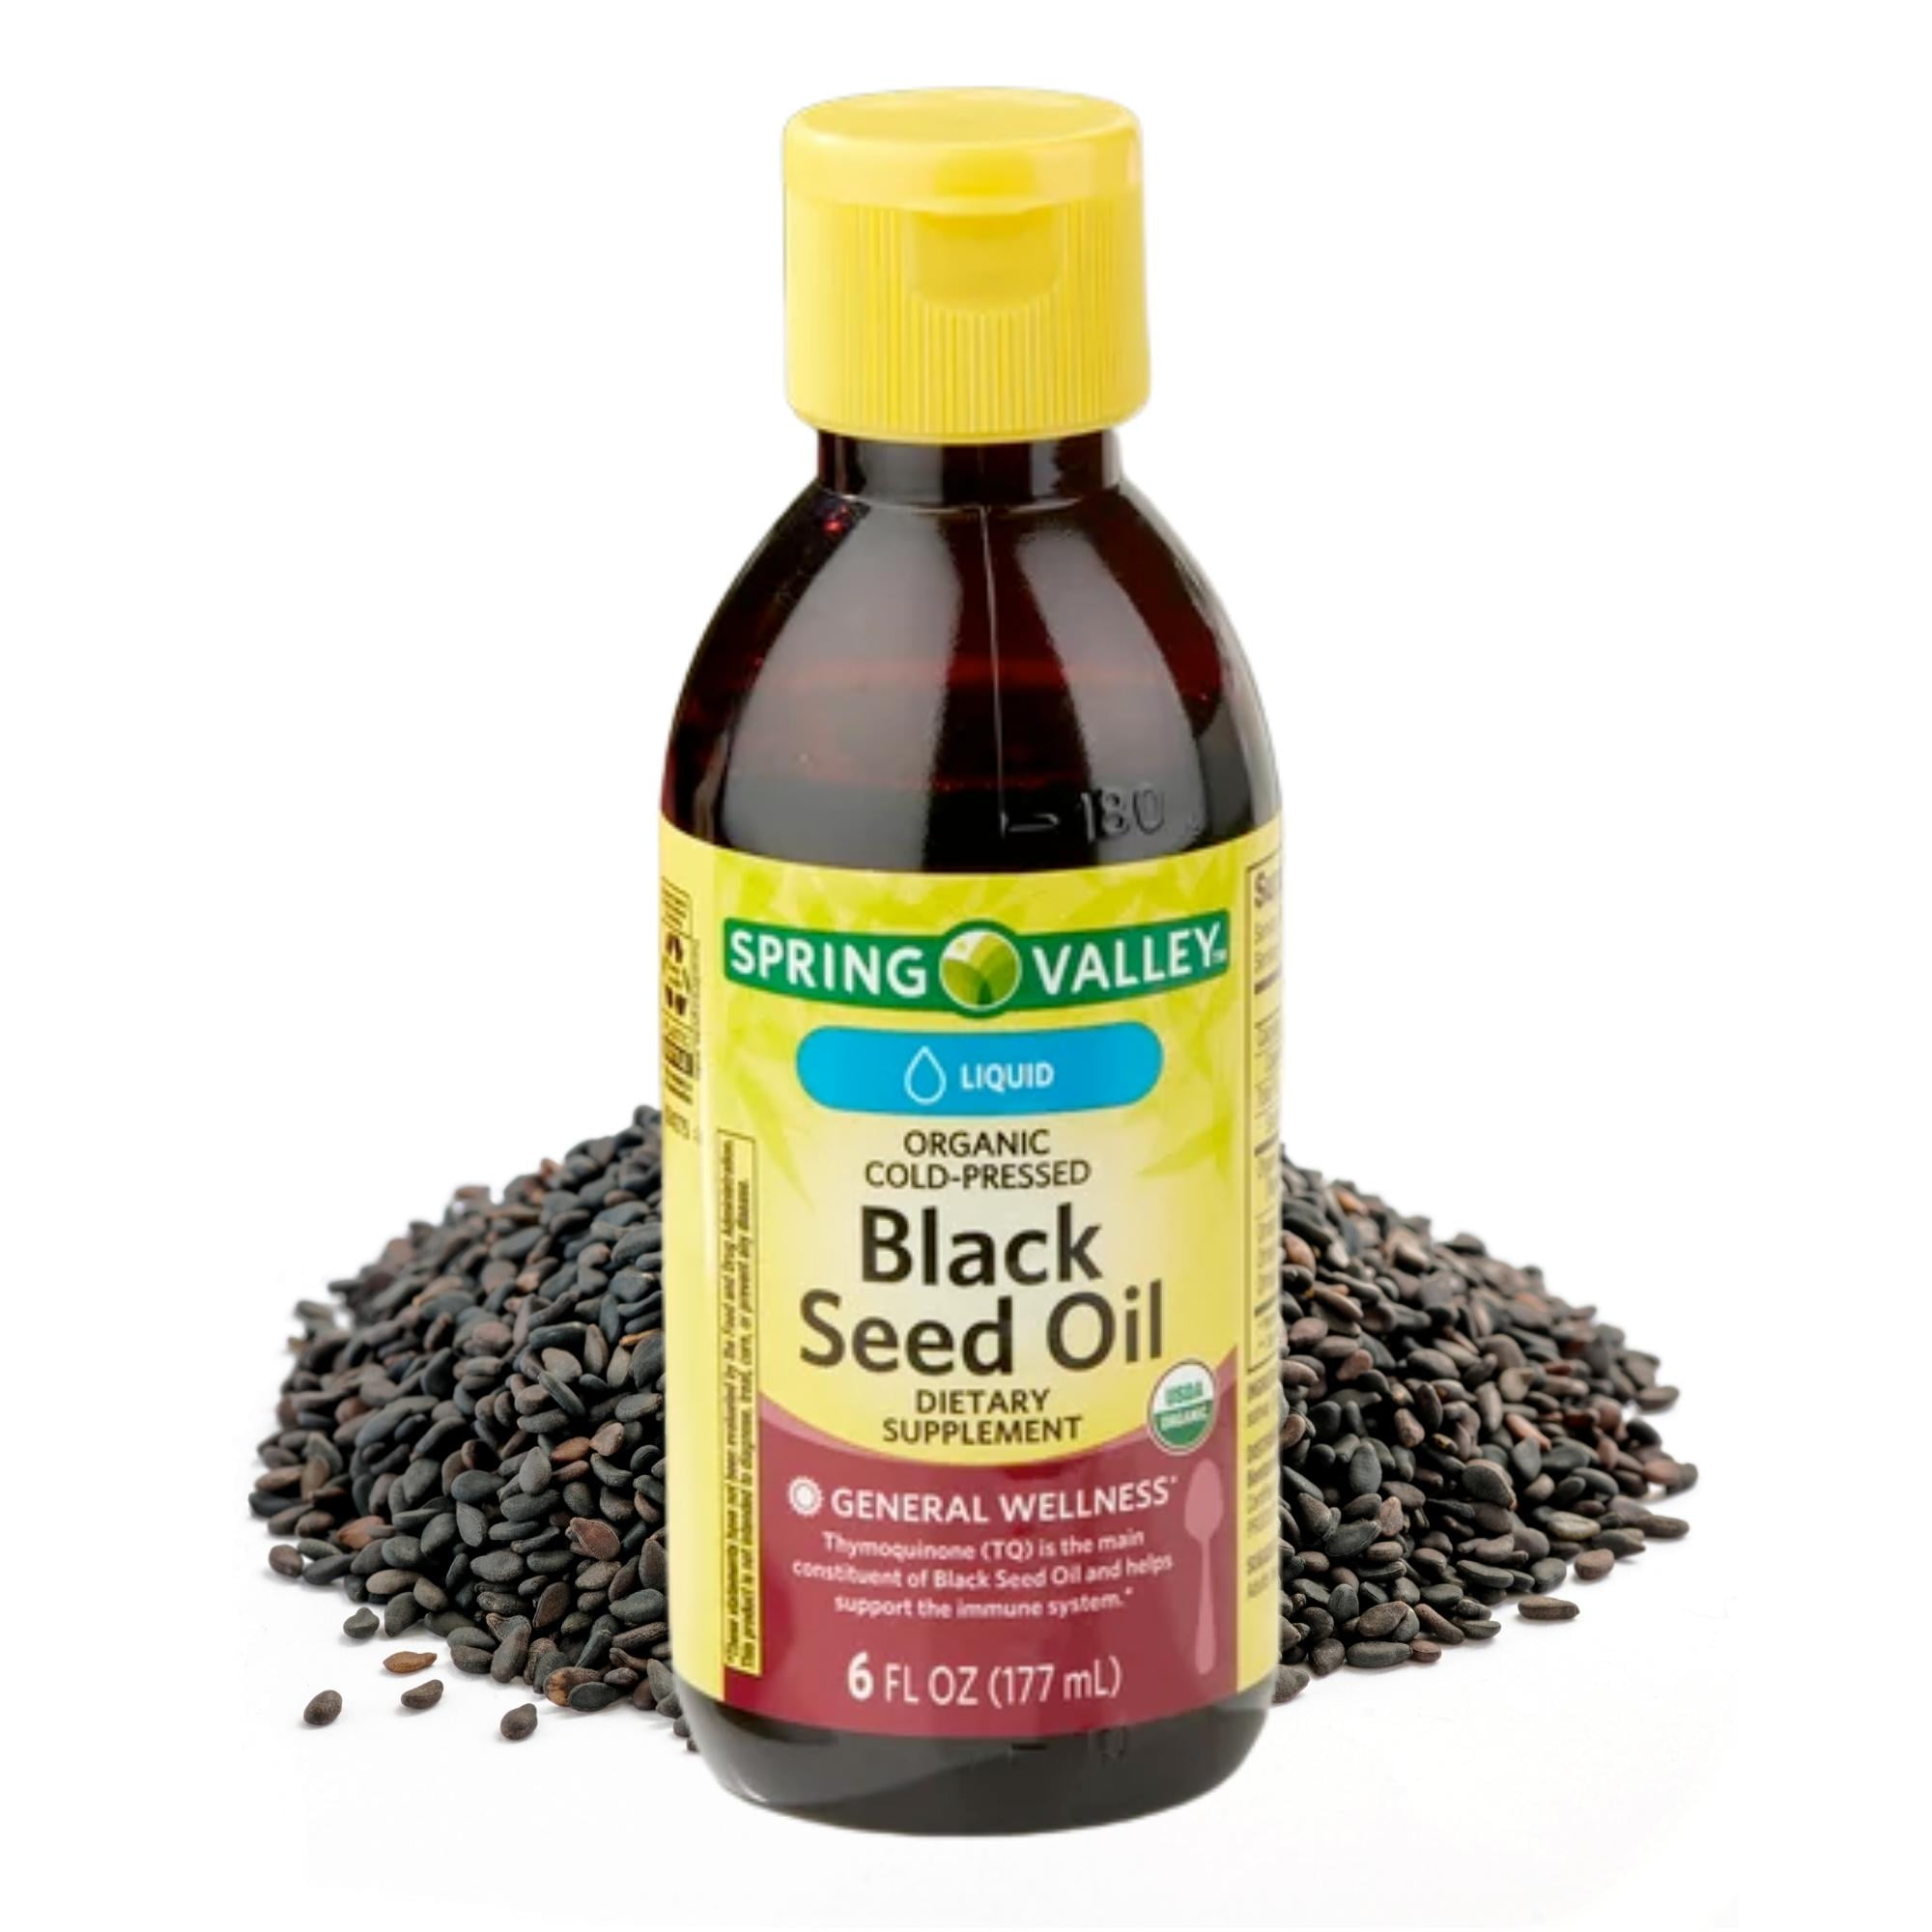 Spring Valley Organic Cold-Pressed Black Seed Oil, Liquid Dietary ...